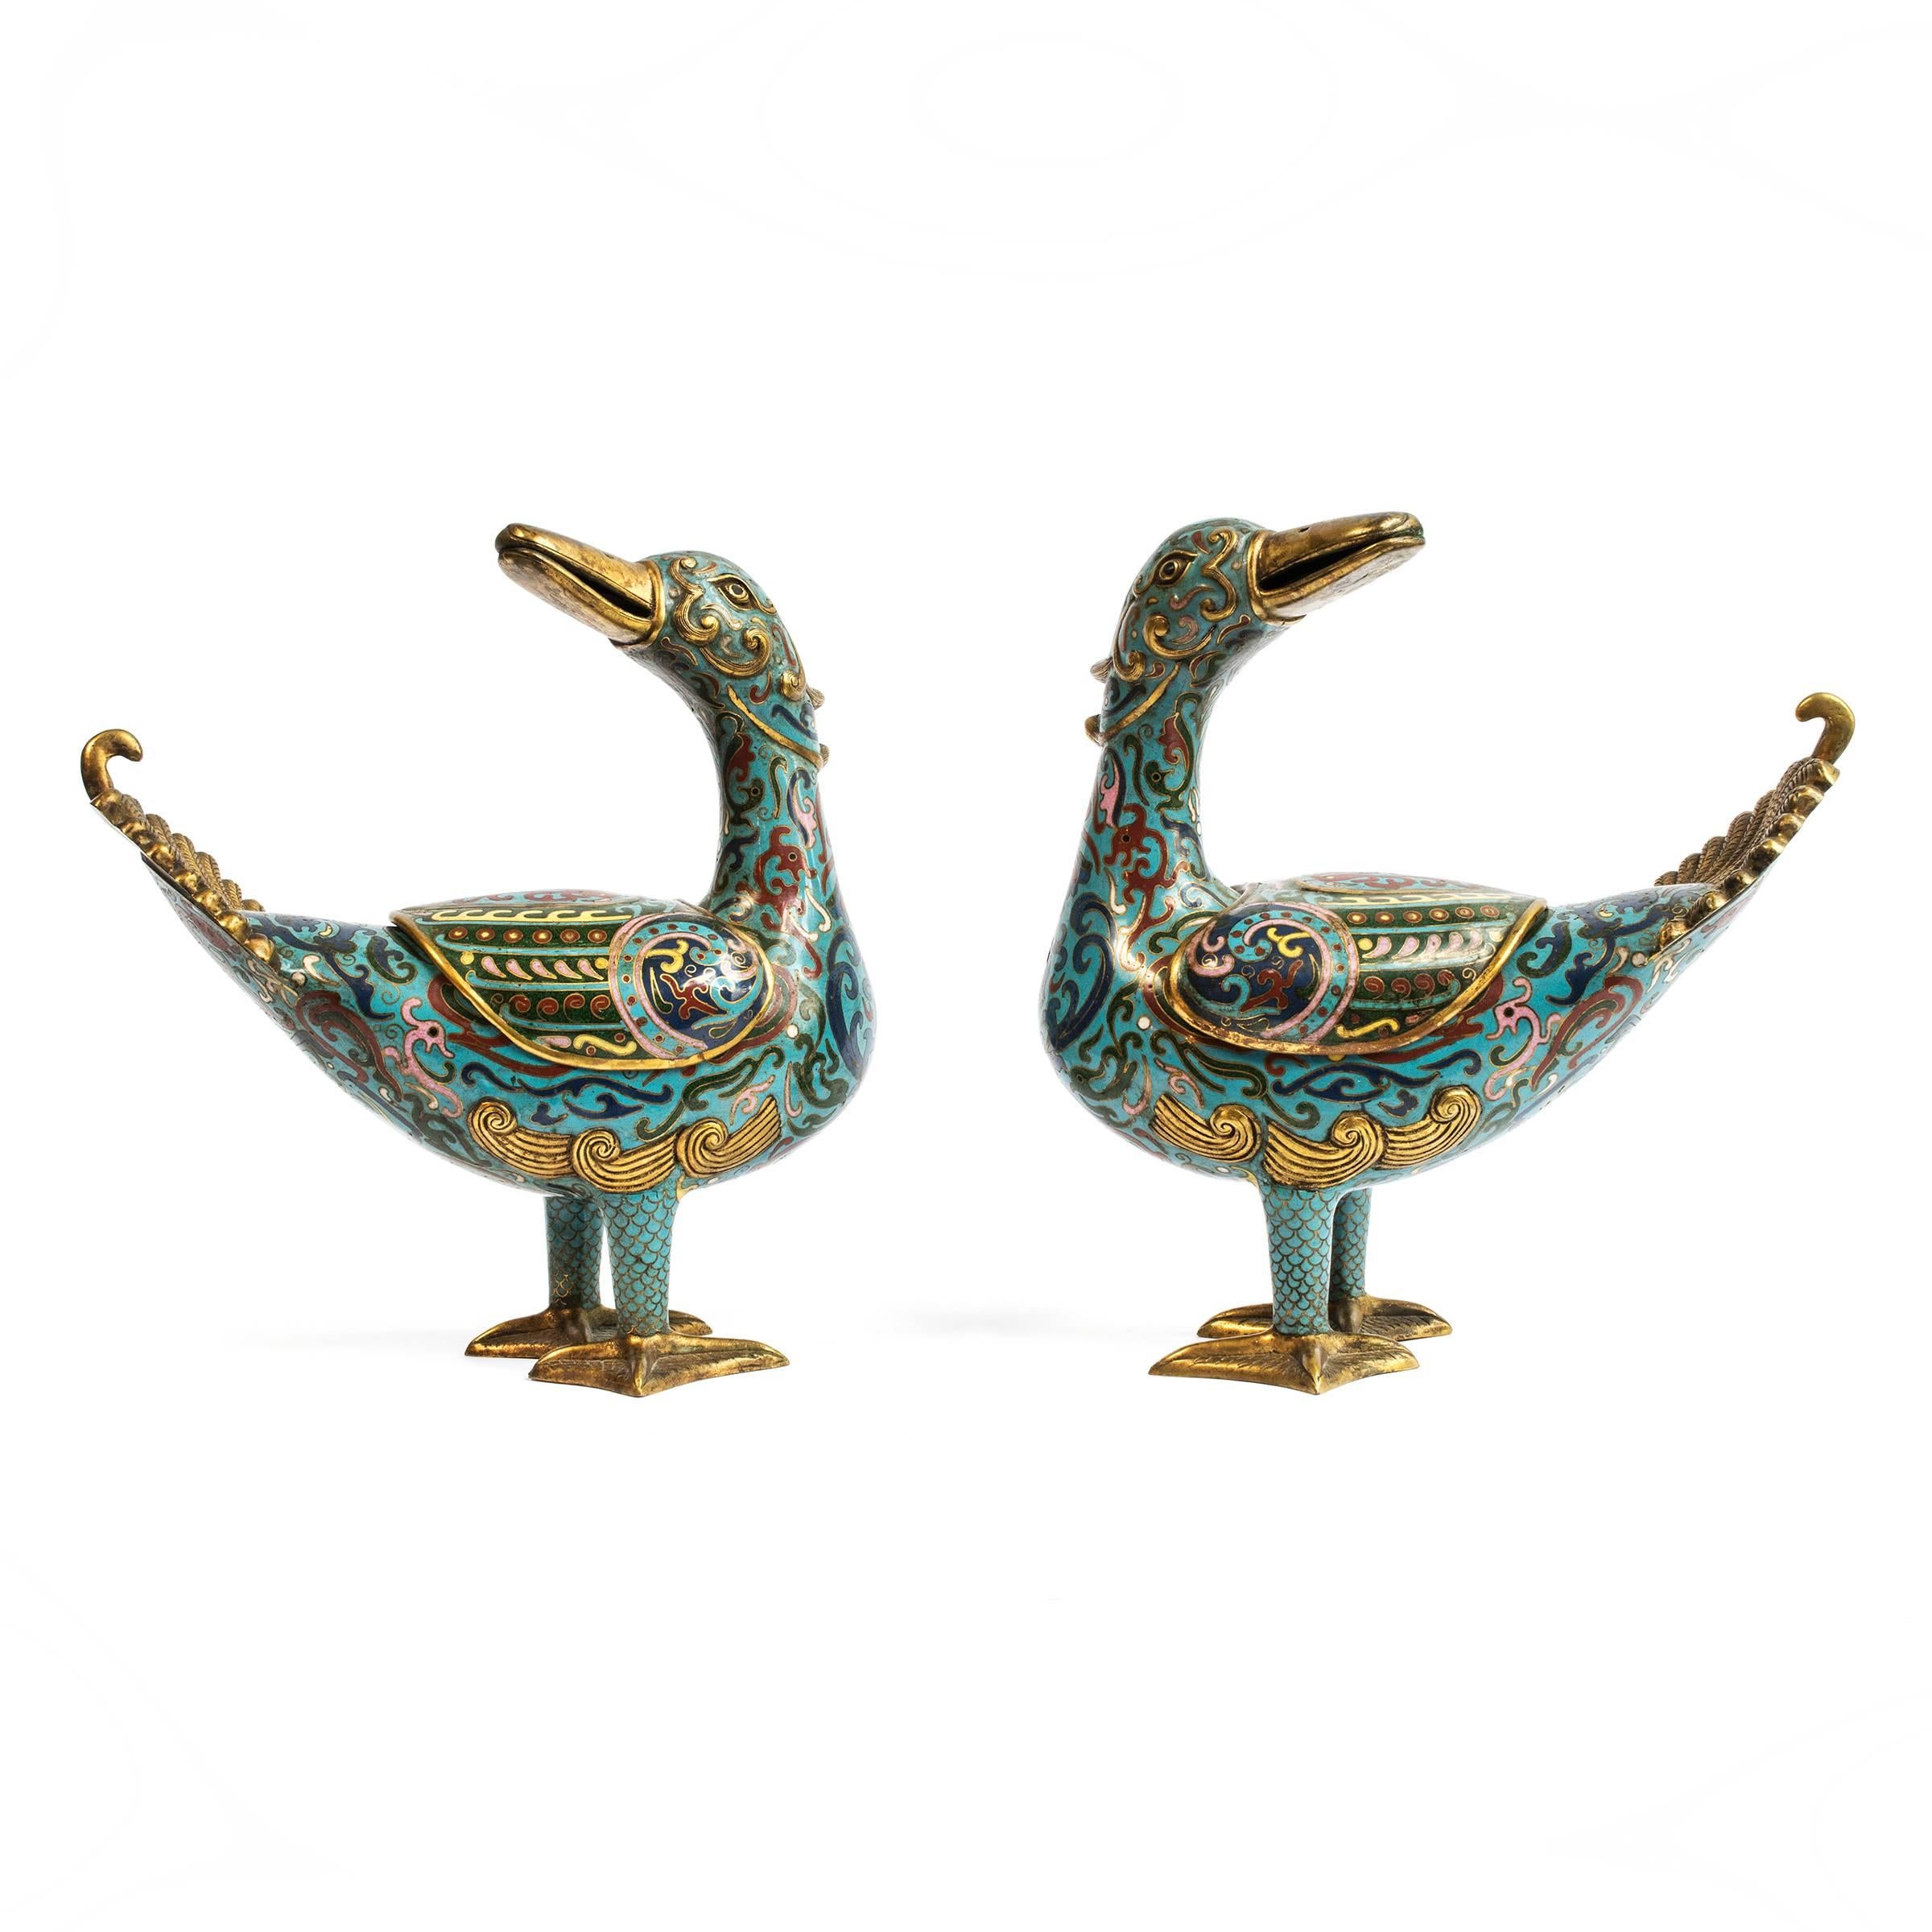 A lady of refinement and taste may have once owned this finely crafted pair of ducks. They were designed as incense burners. Perhaps they were a wedding gift — ducks symbolize felicity and conjugal fidelity — and were kept in the lady’s chambers.